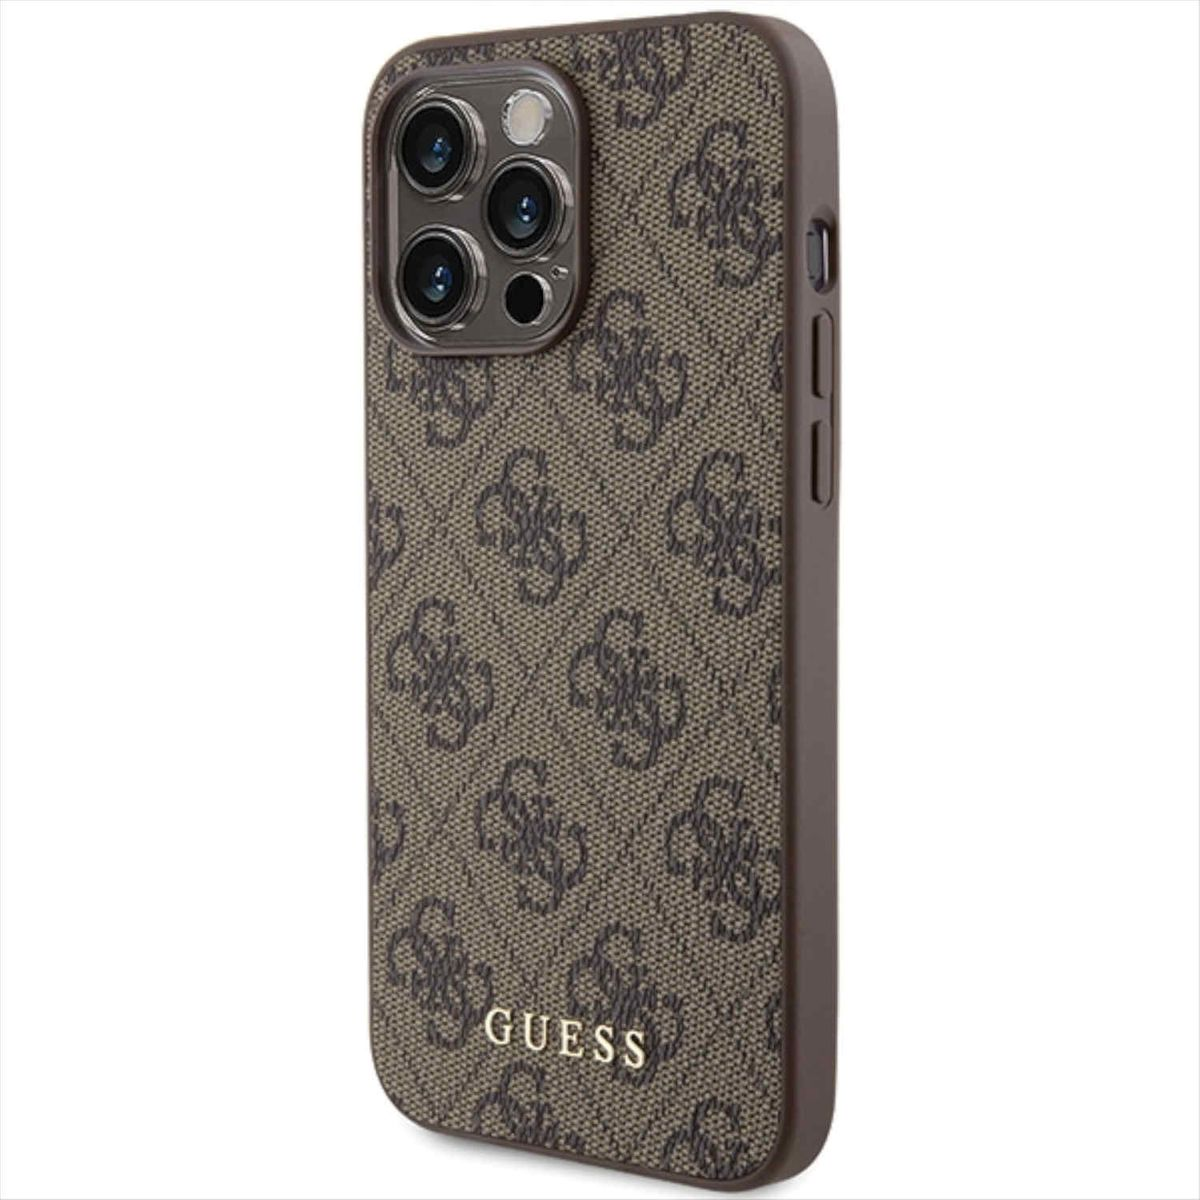 iPhone Logo Pro Tasche Metal Gold 15 Backcover, Braun Apple, GUESS Hülle, 4G Max,